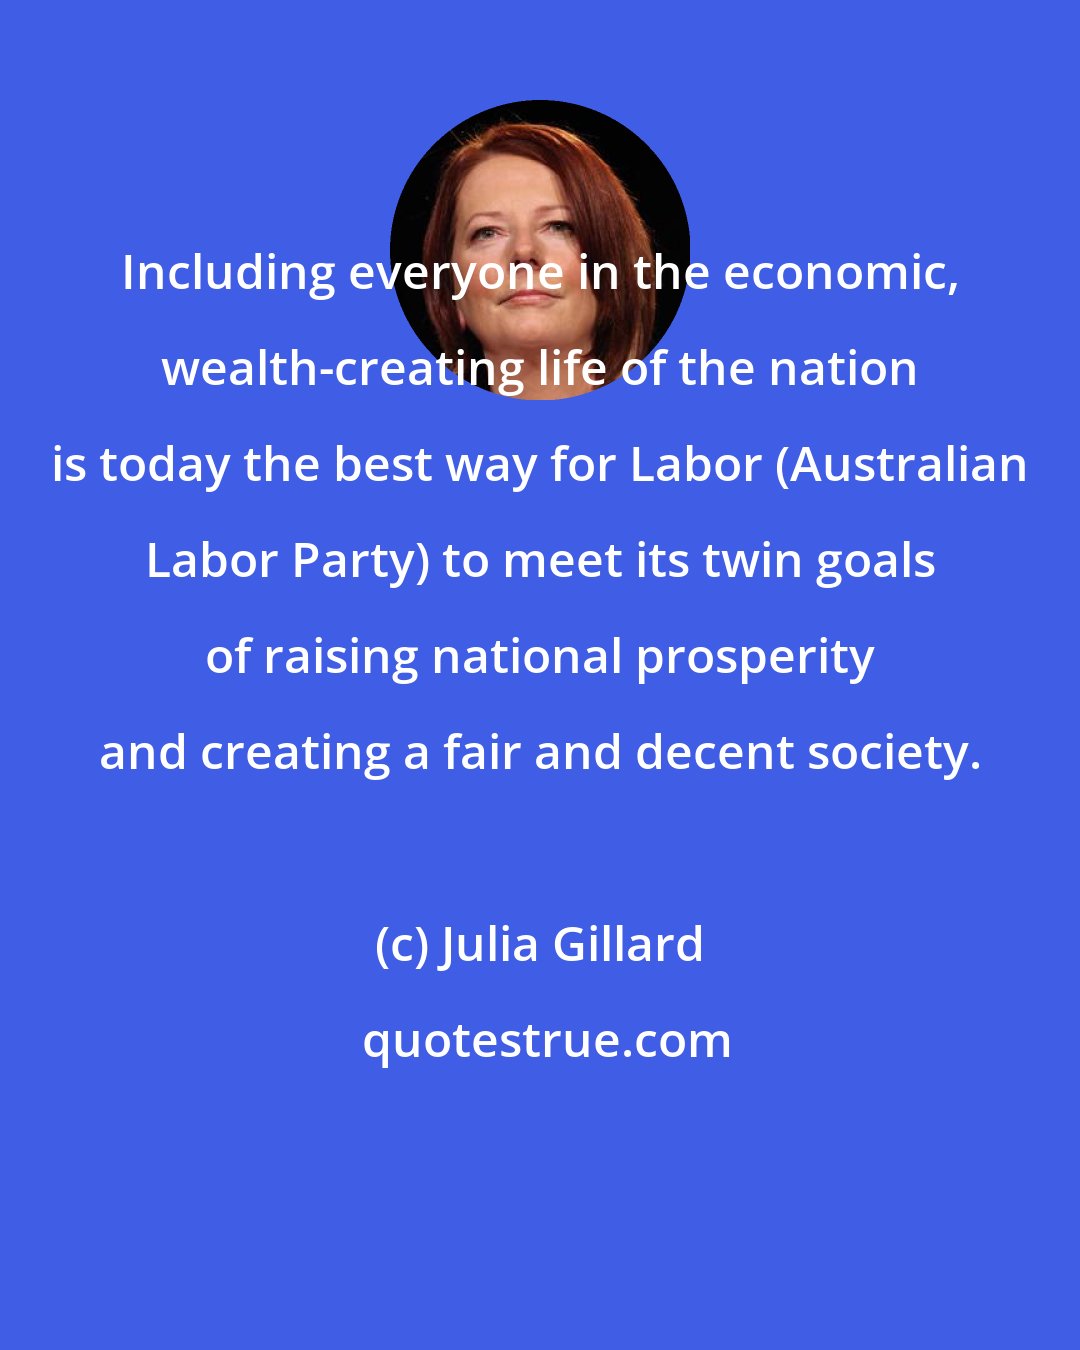 Julia Gillard: Including everyone in the economic, wealth-creating life of the nation is today the best way for Labor (Australian Labor Party) to meet its twin goals of raising national prosperity and creating a fair and decent society.